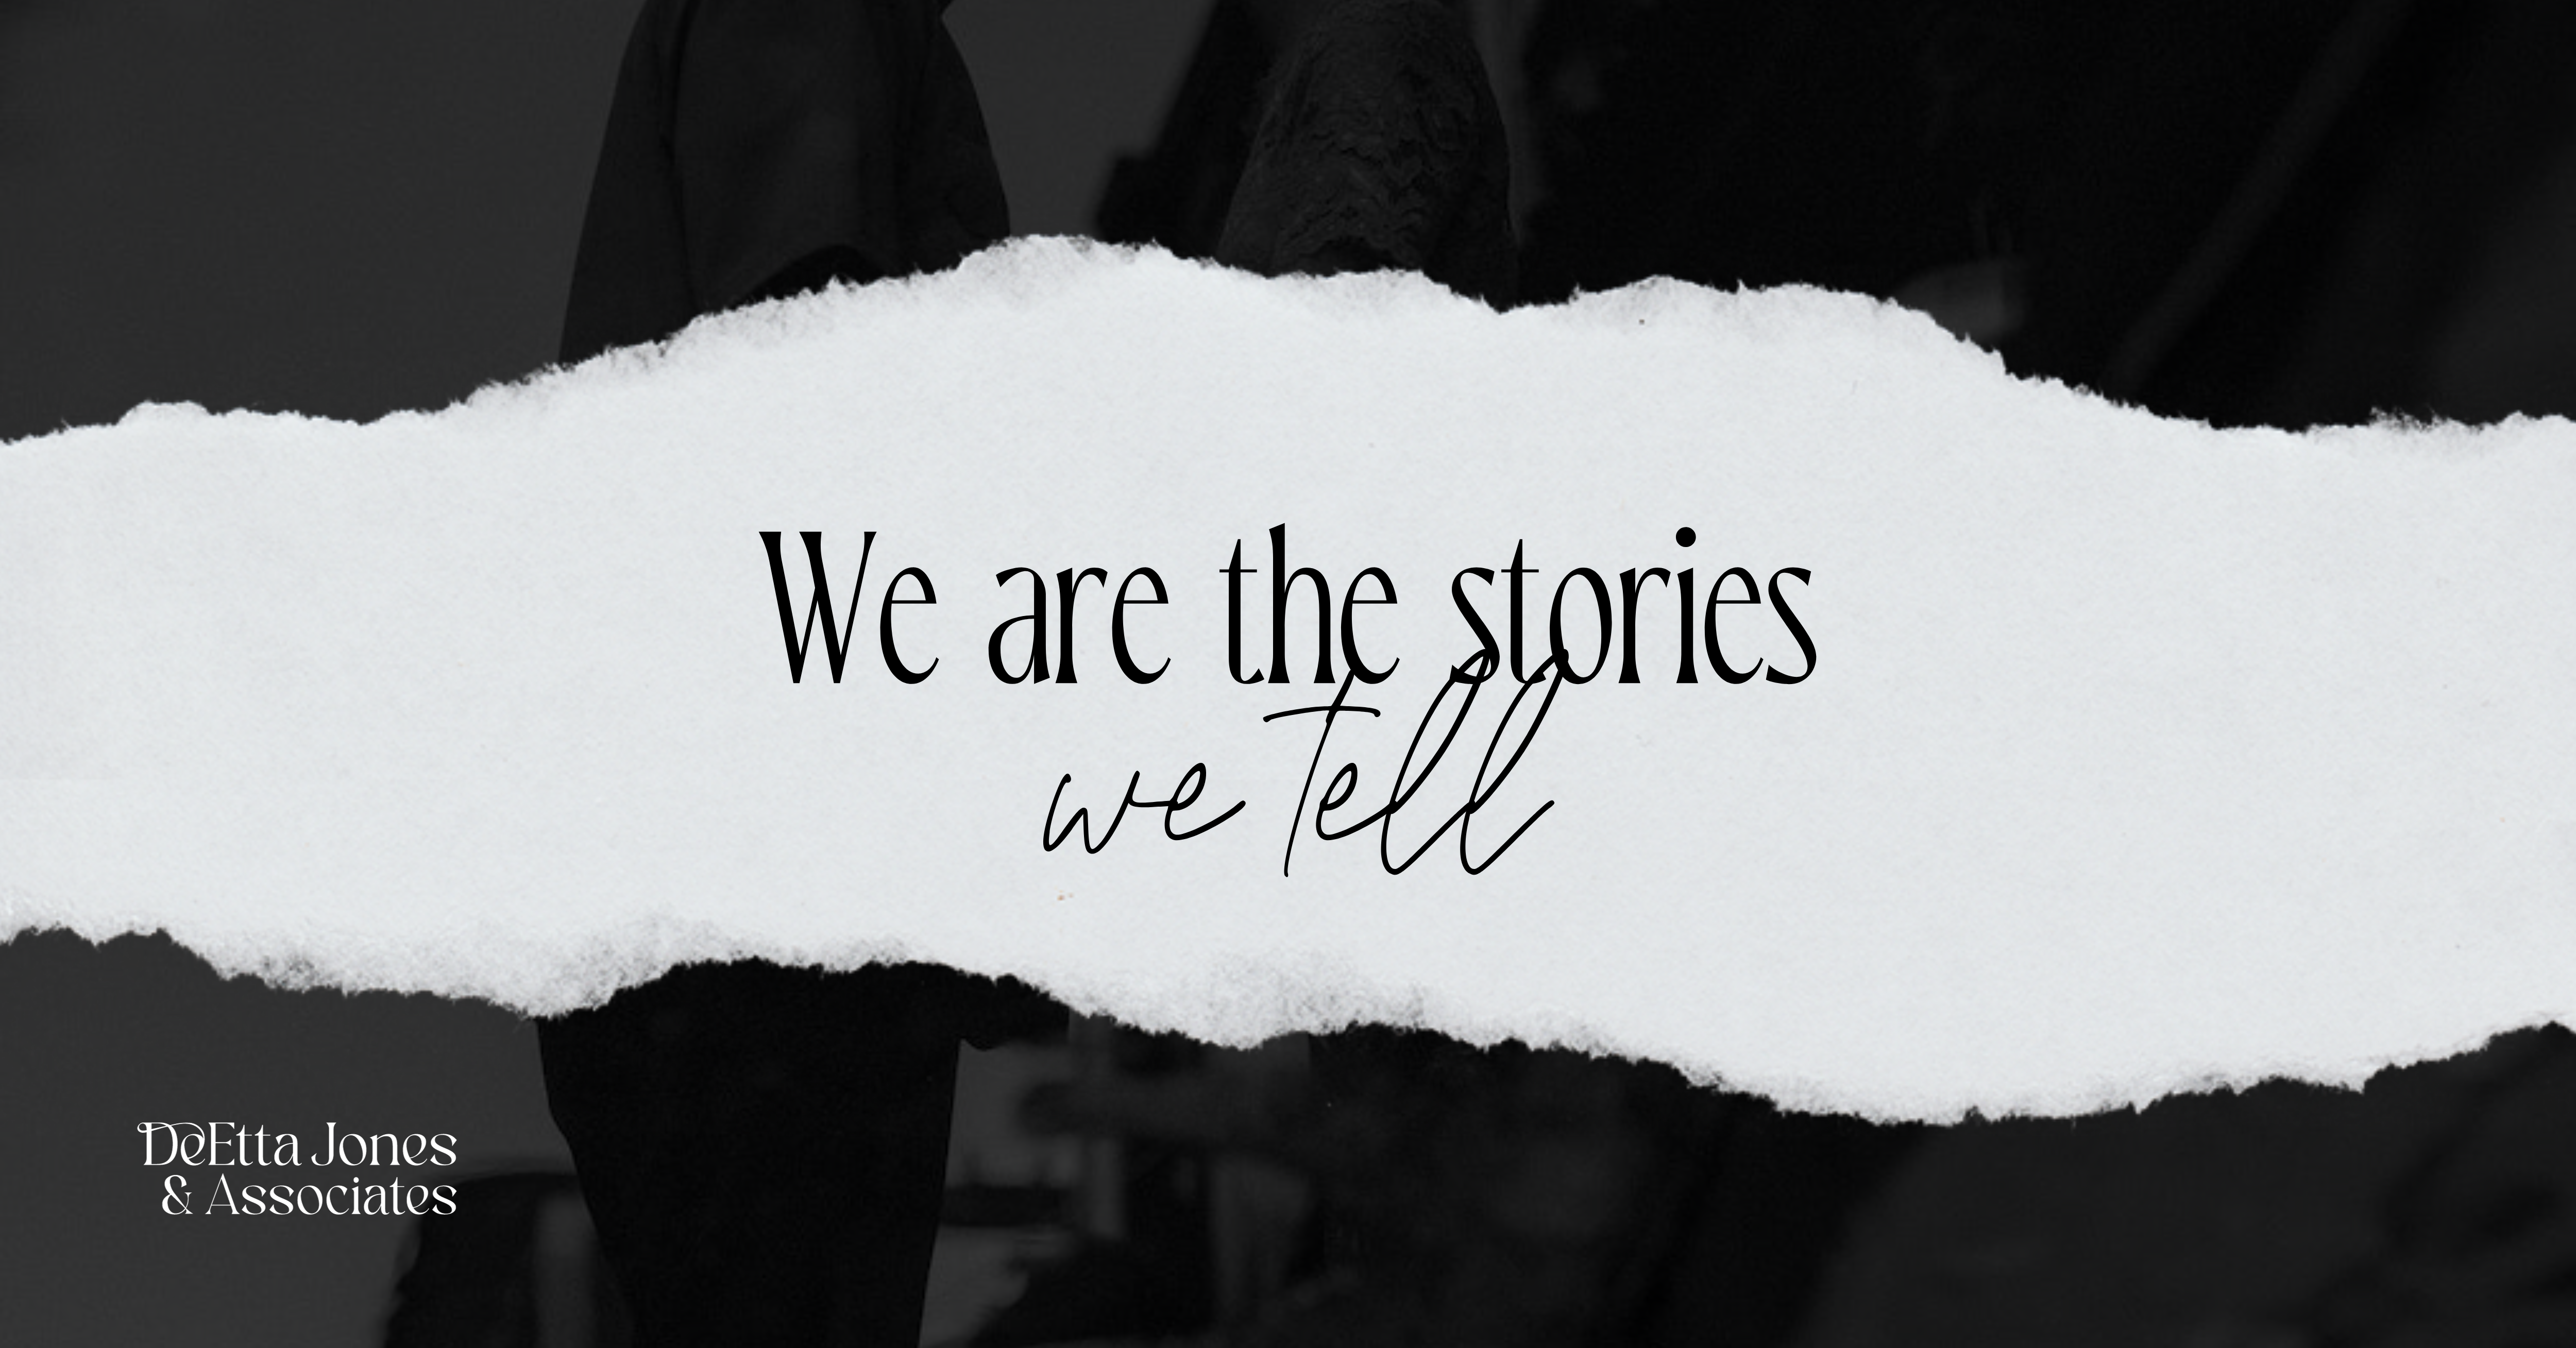 We Are the Stories We Tell